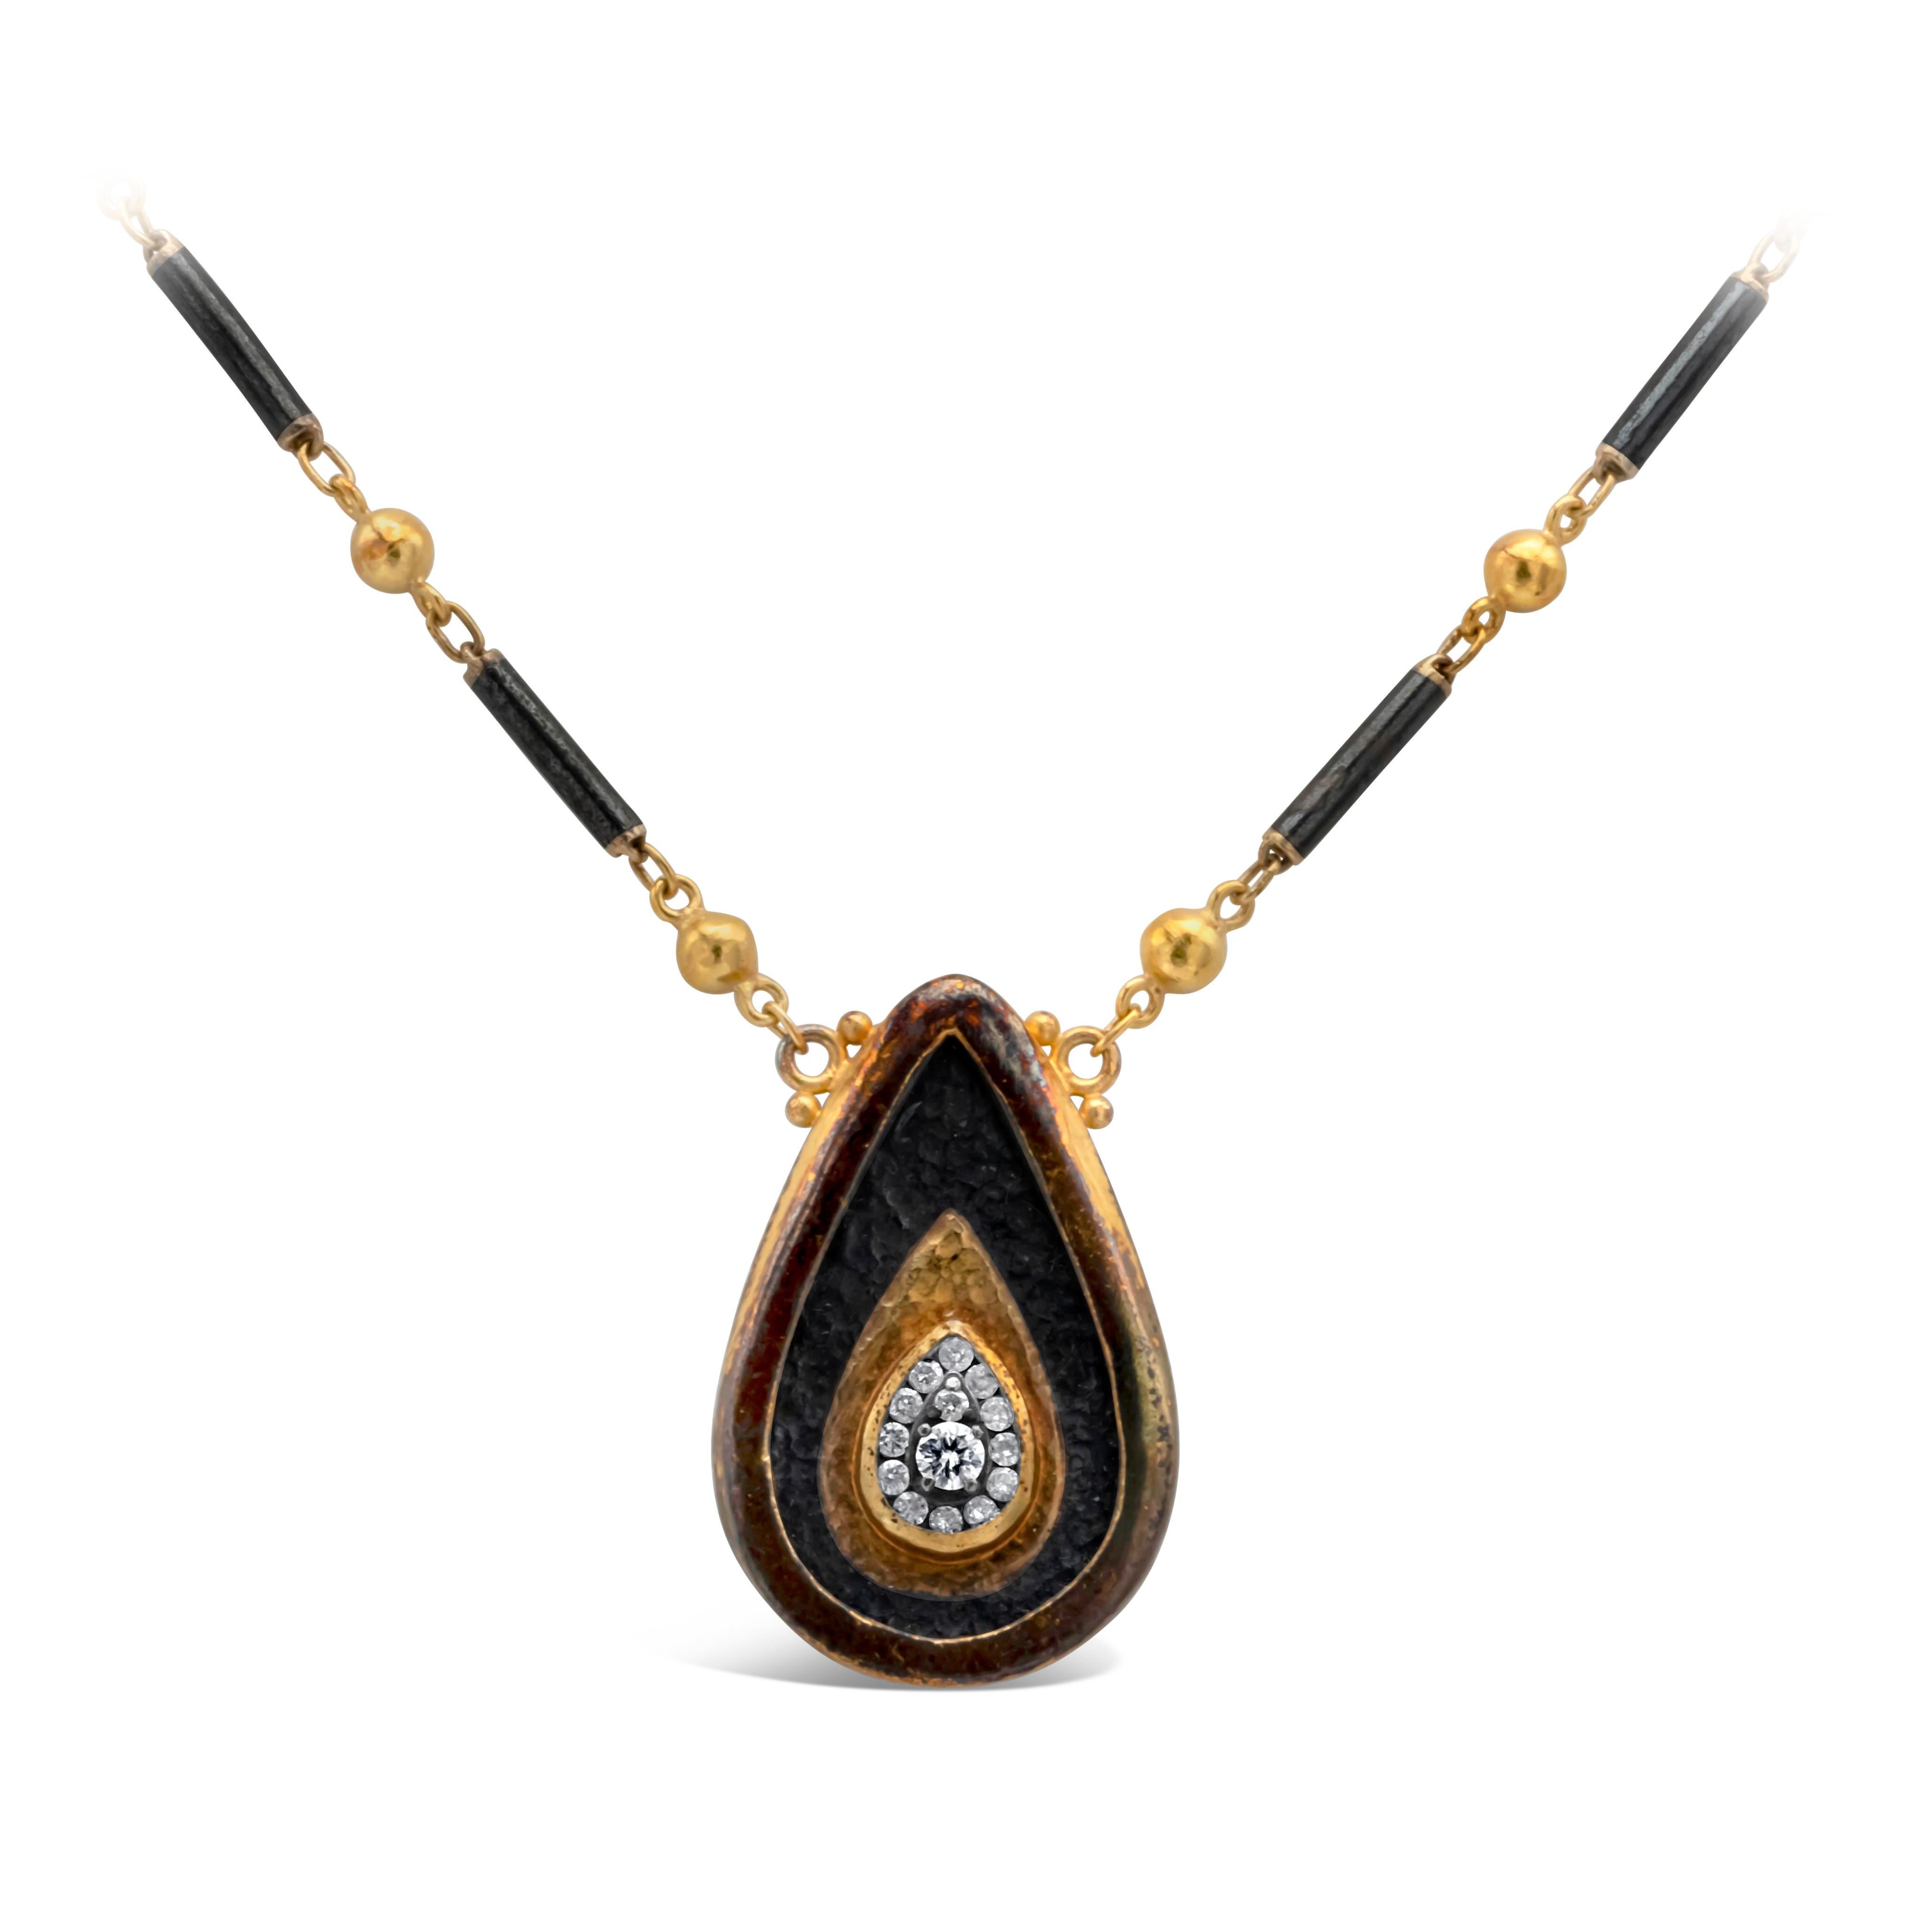 Pendant necklace showcasing a large pear shape tear drop design made with yellow gold and blackened silver top, crafted with 14 round diamonds weighing 0.25 carats total. Suspended on a GURHAN jet set yellow gold single strand with jet beads chain.